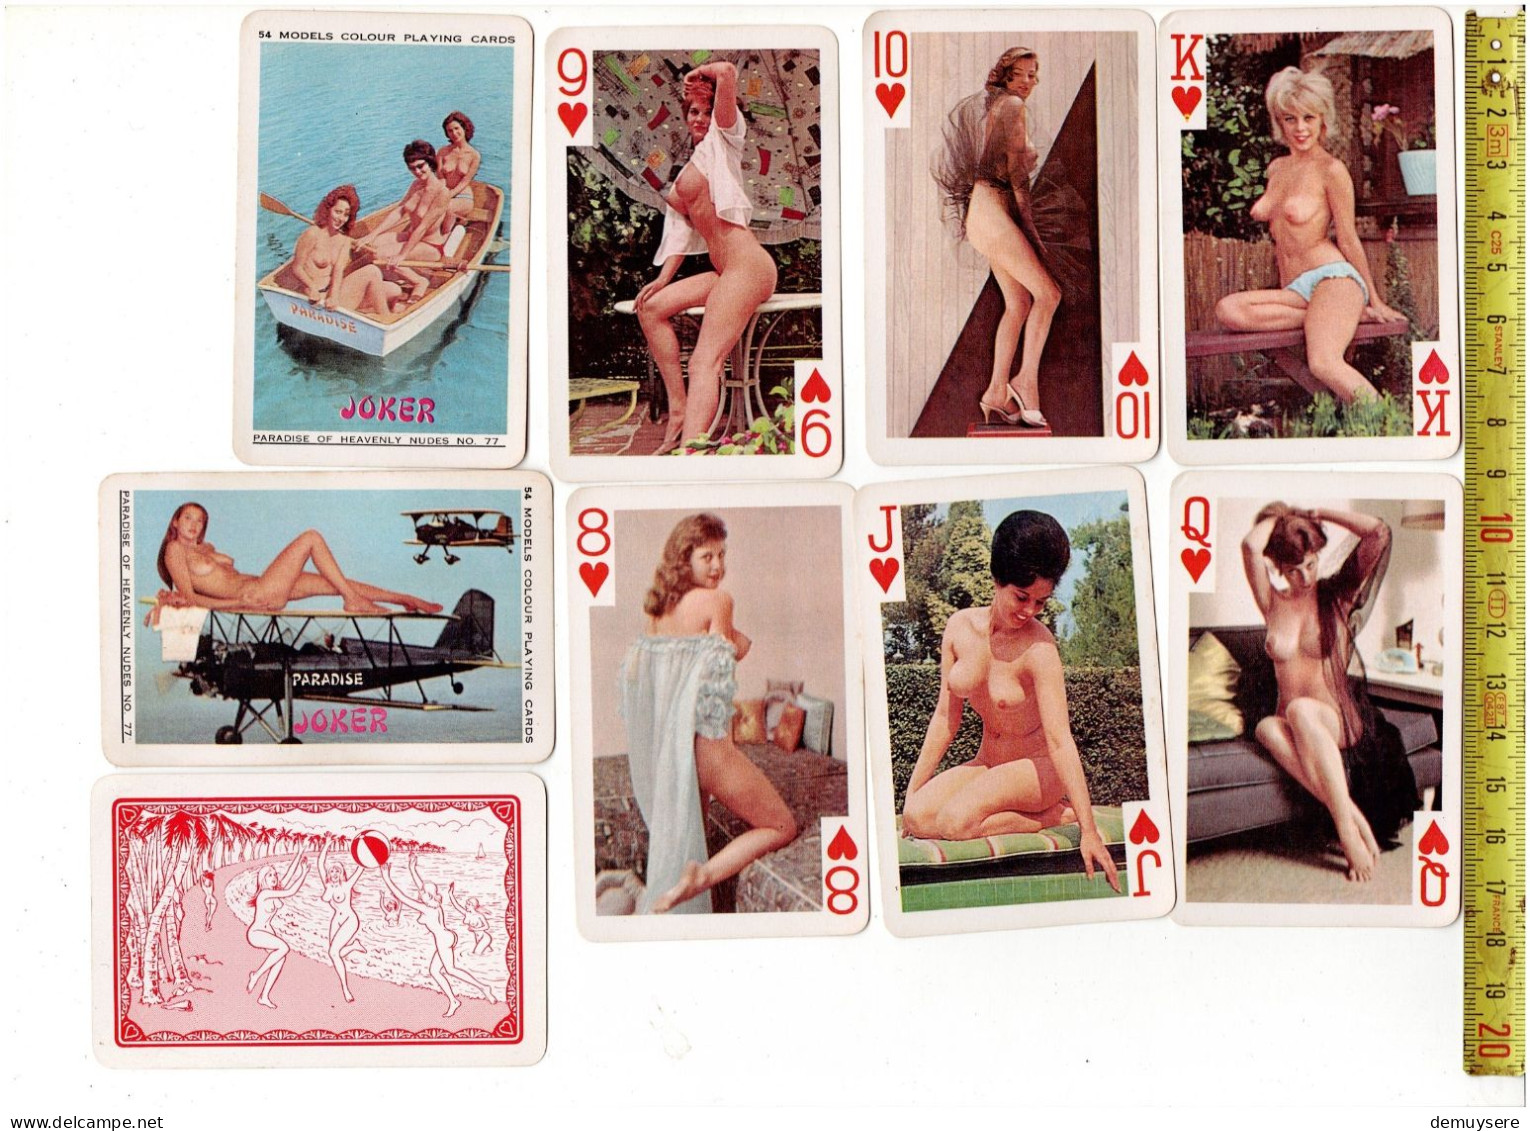 54 MODELS COLOUR PLAYING CARDS - PARADISE OF HEAVENLY NUDES NO 77 - Kartenspiele (traditionell)